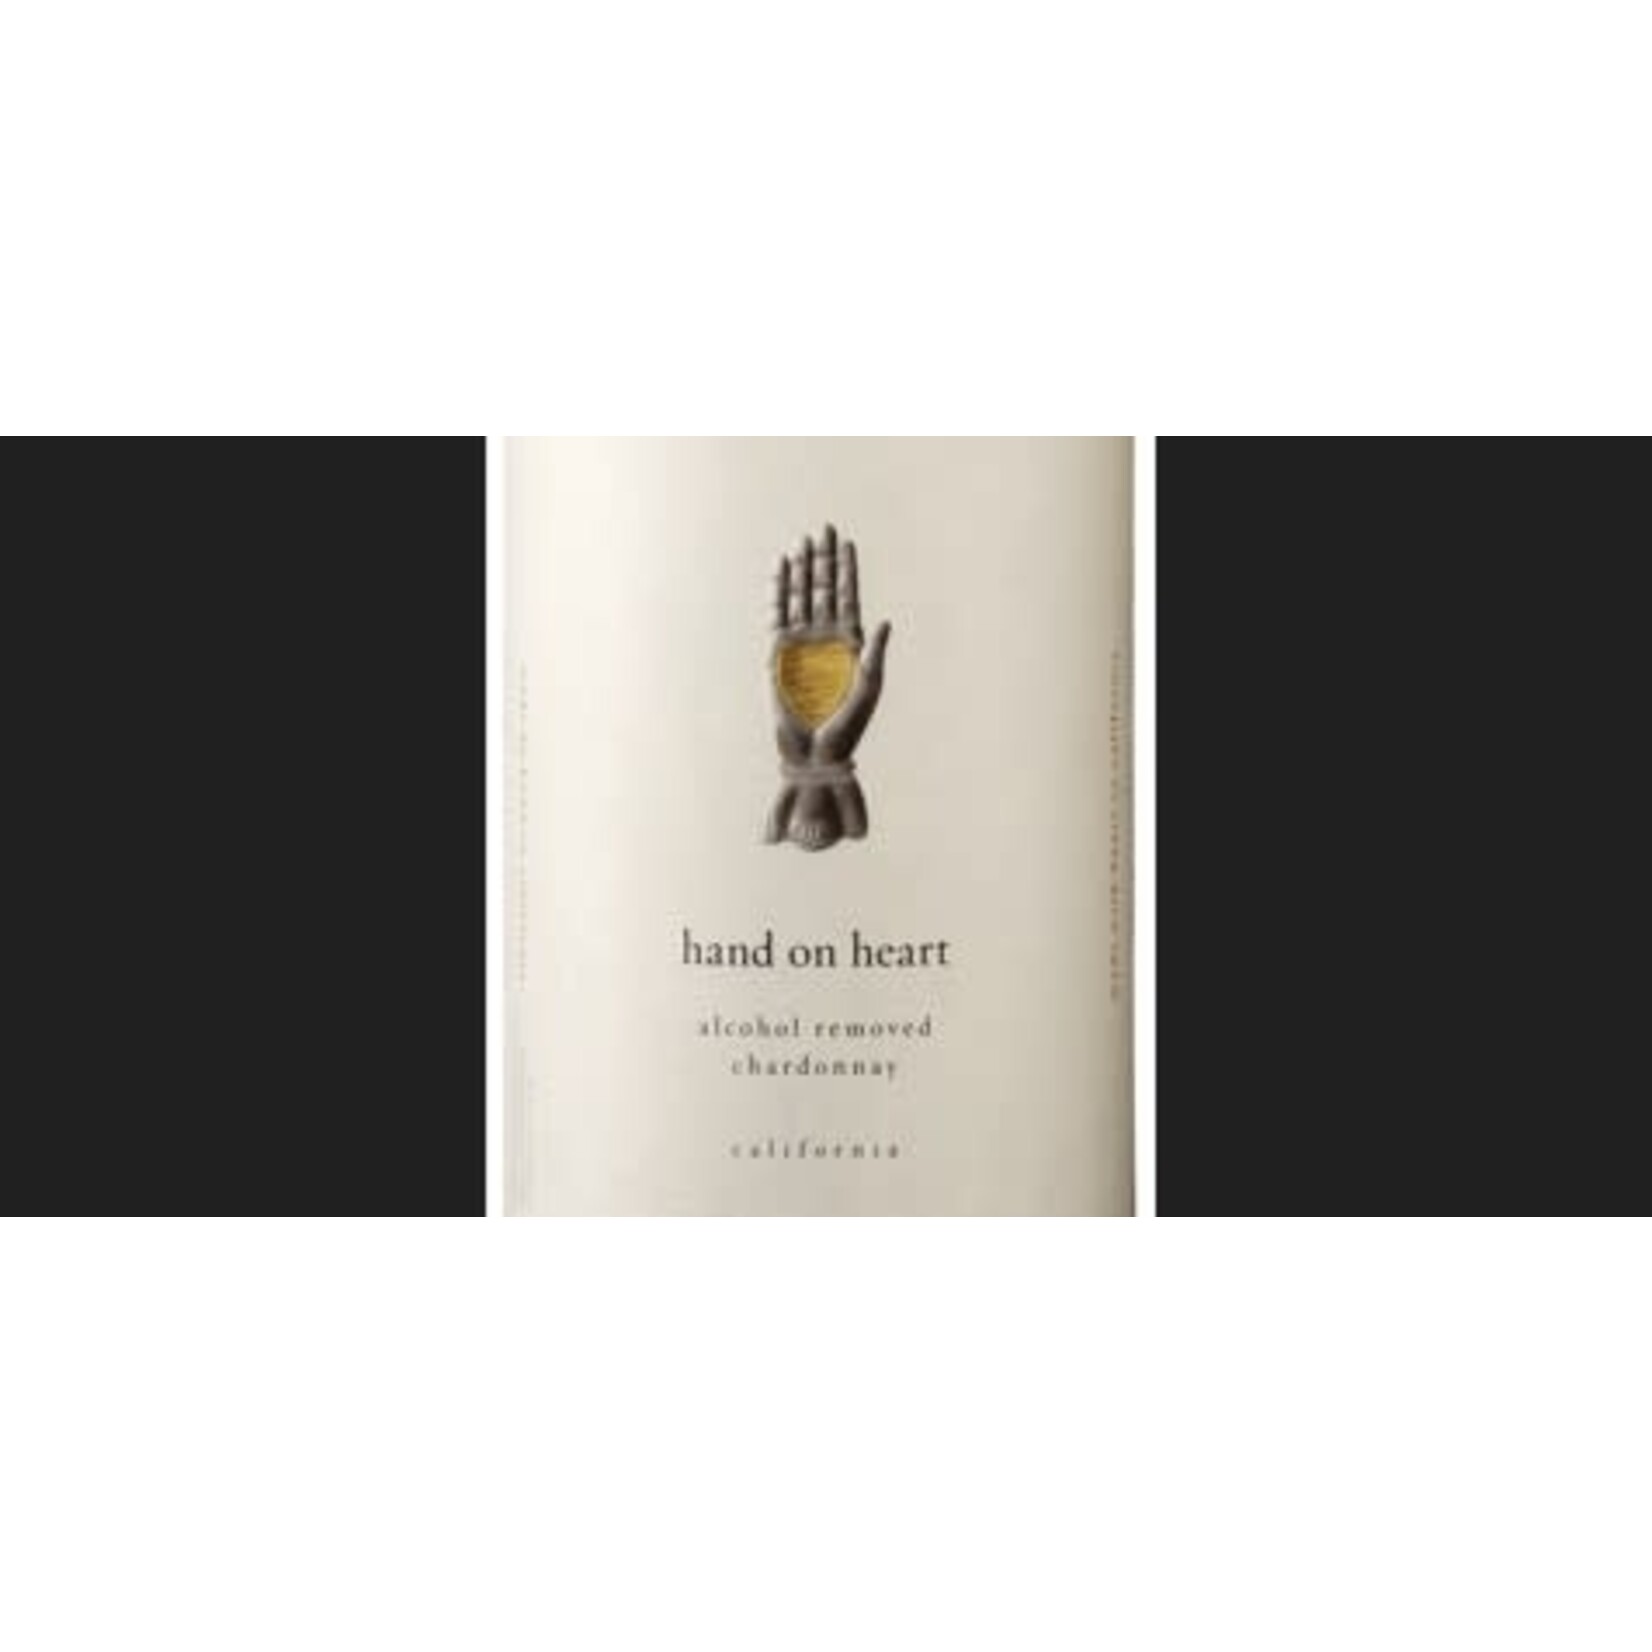 Hand on Heart Alcohol Removed Chardonnay California